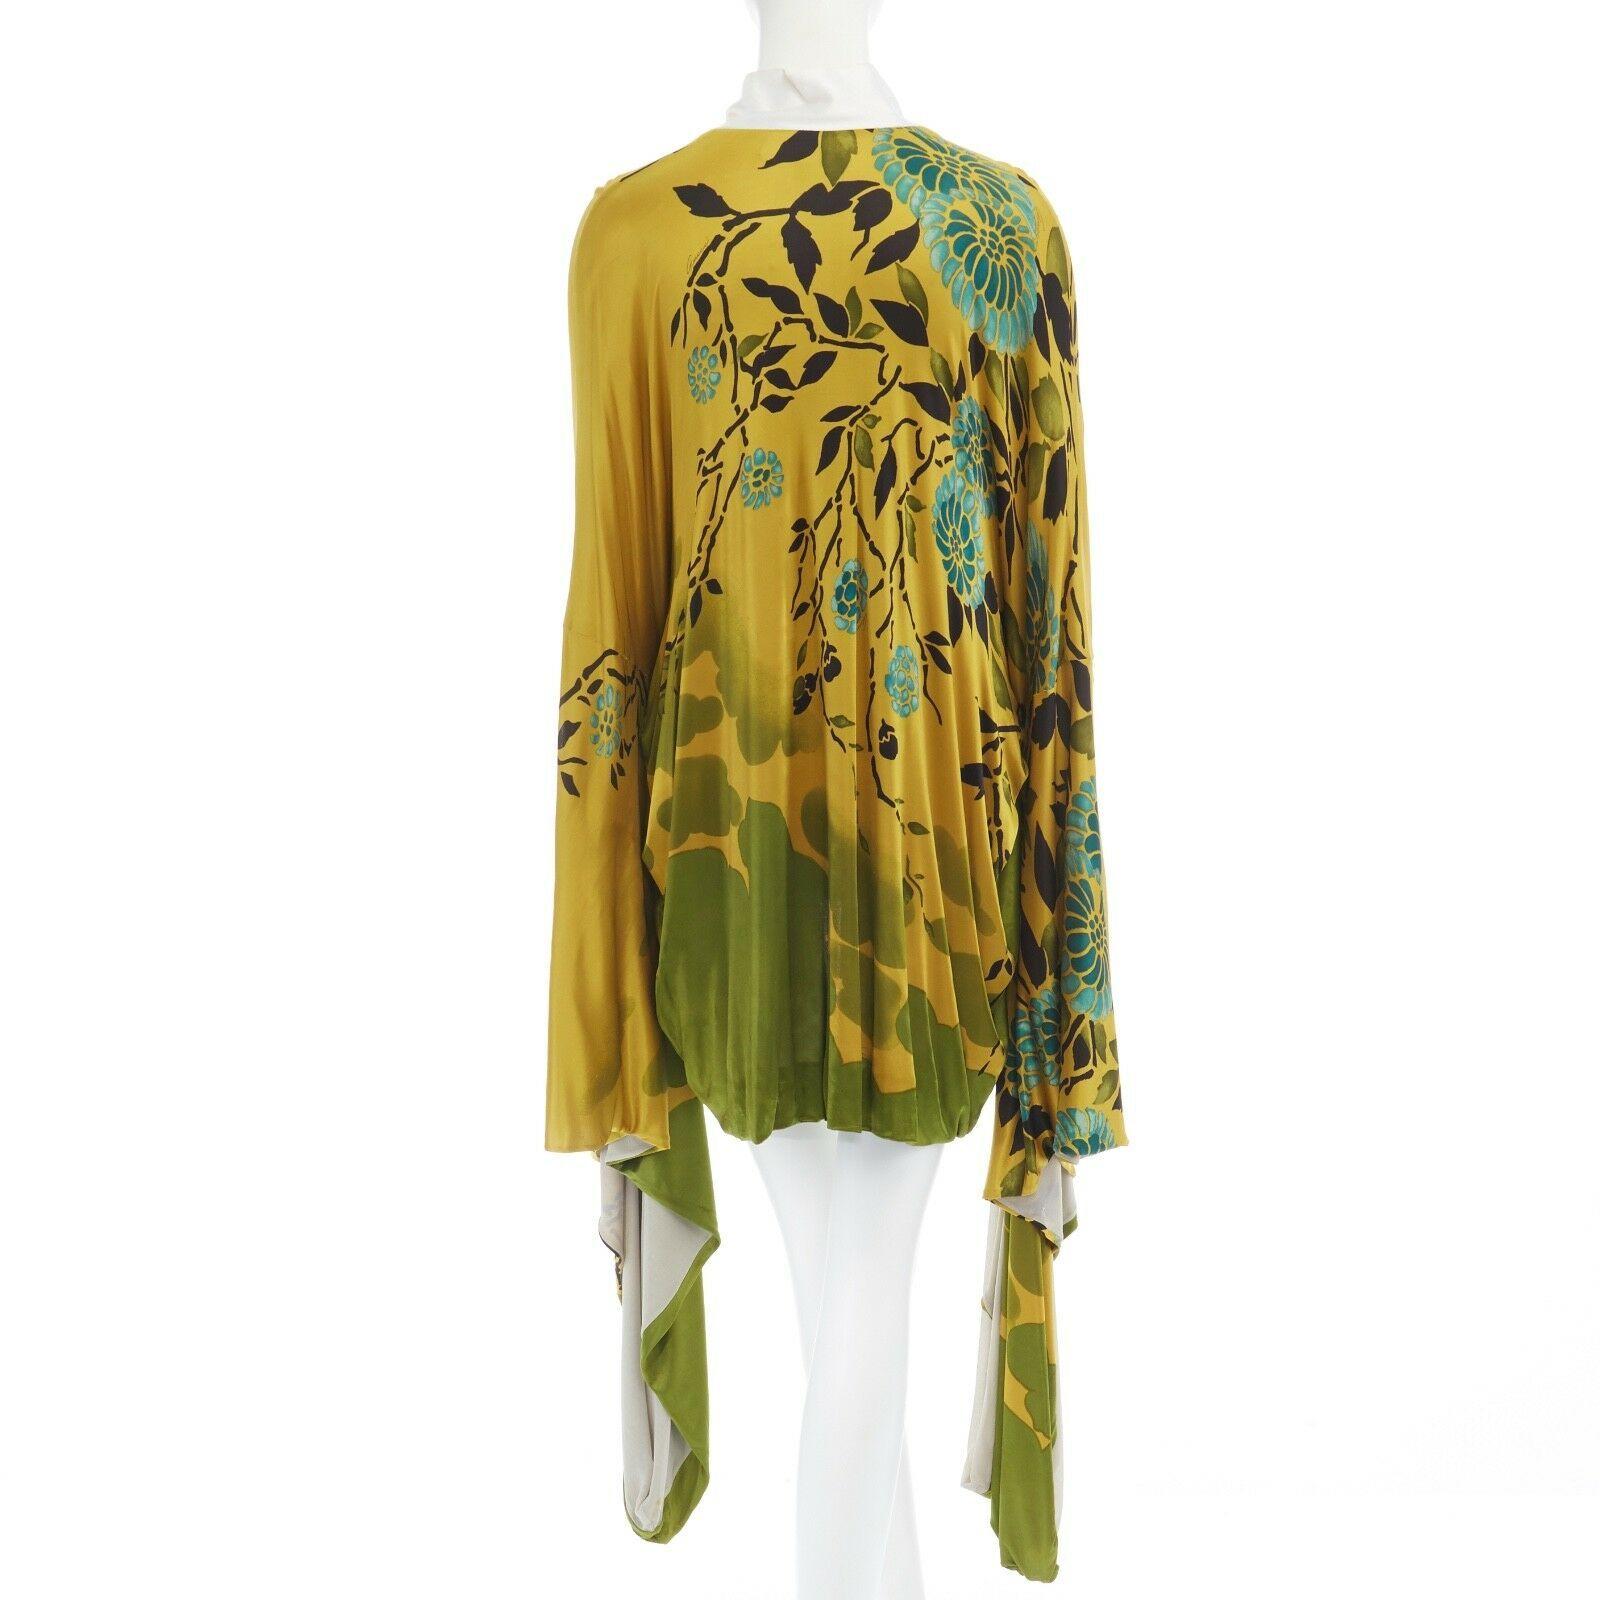 runway GUCCI TOM FORD Vintage SS03 yellow oriental kimono robe jacket IT40 S
GUCCI BY TOM FORD
FROM THE SPRING SUMMER 2003 RUNWAY AND CAMPAIGN
RAYON, VISCOSE. YELLOW BASE. ORIENTAL JAPANESE FLORAL BRUSHSTROKE PAINTING PRINT. 
WHITE KIMONO COLLAR.